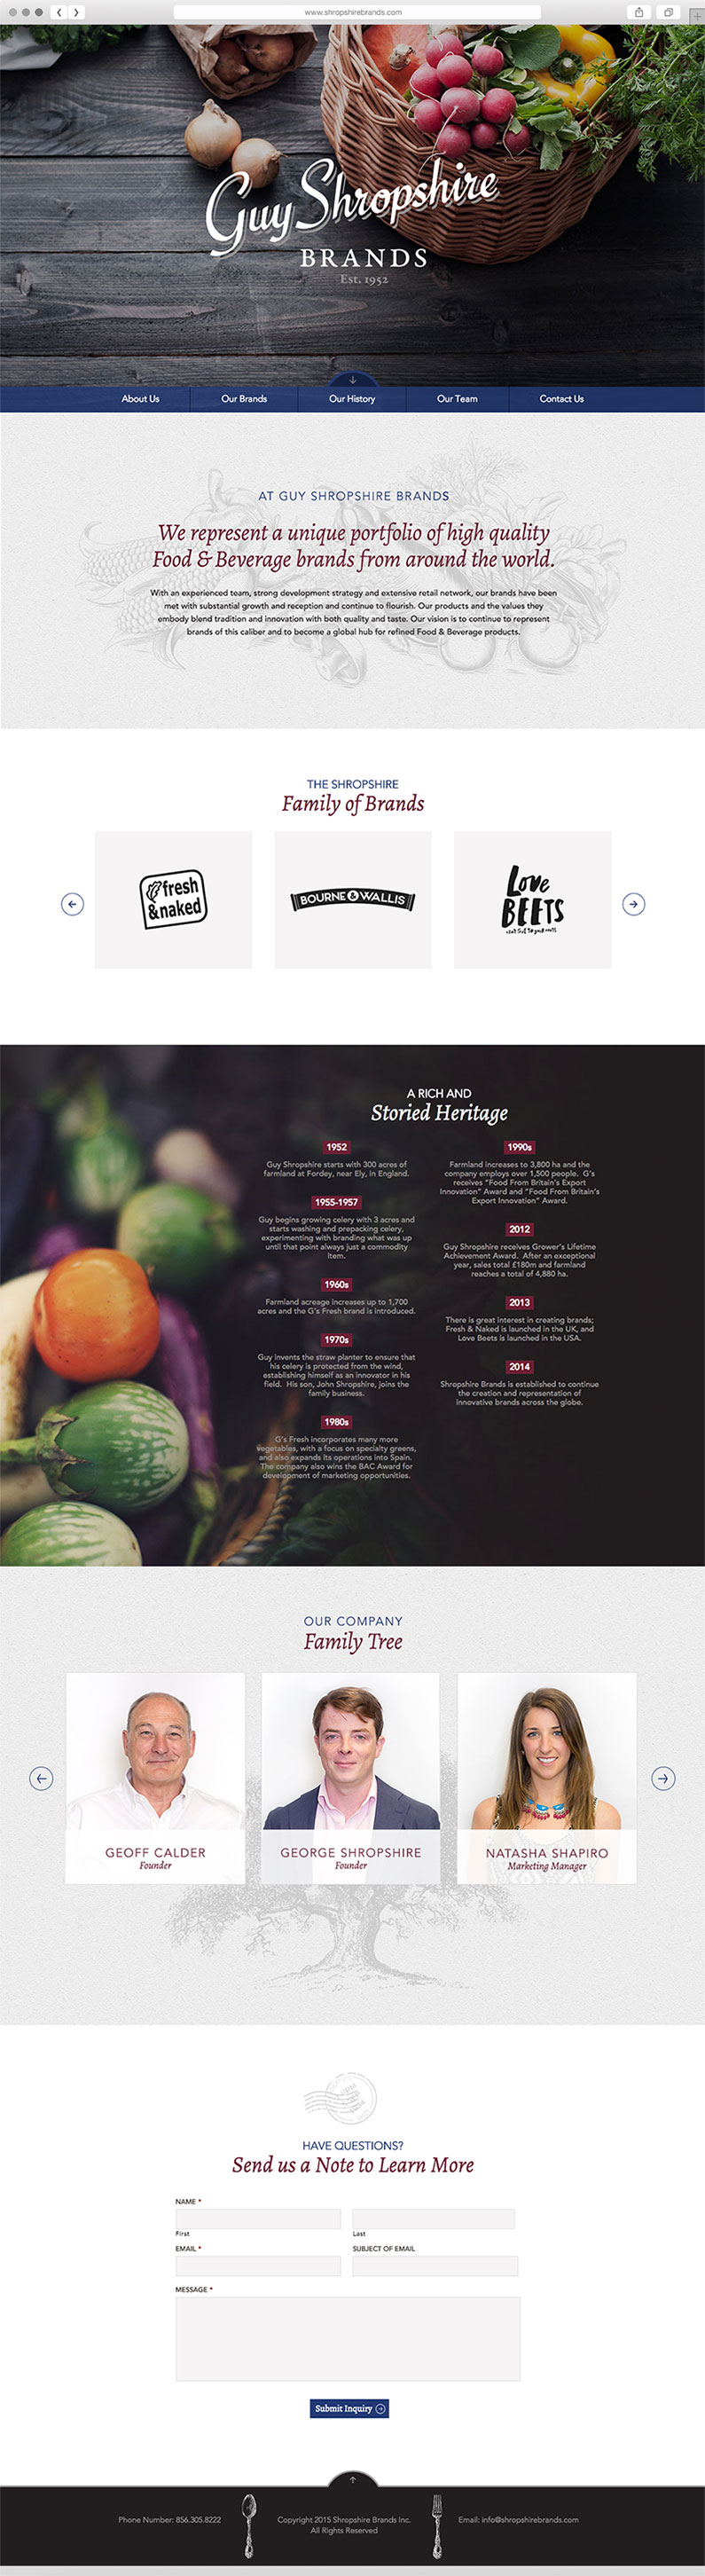 User Friendly Web Design for the Food and Beverage Industry by Push10, Guy Shropshire brands website